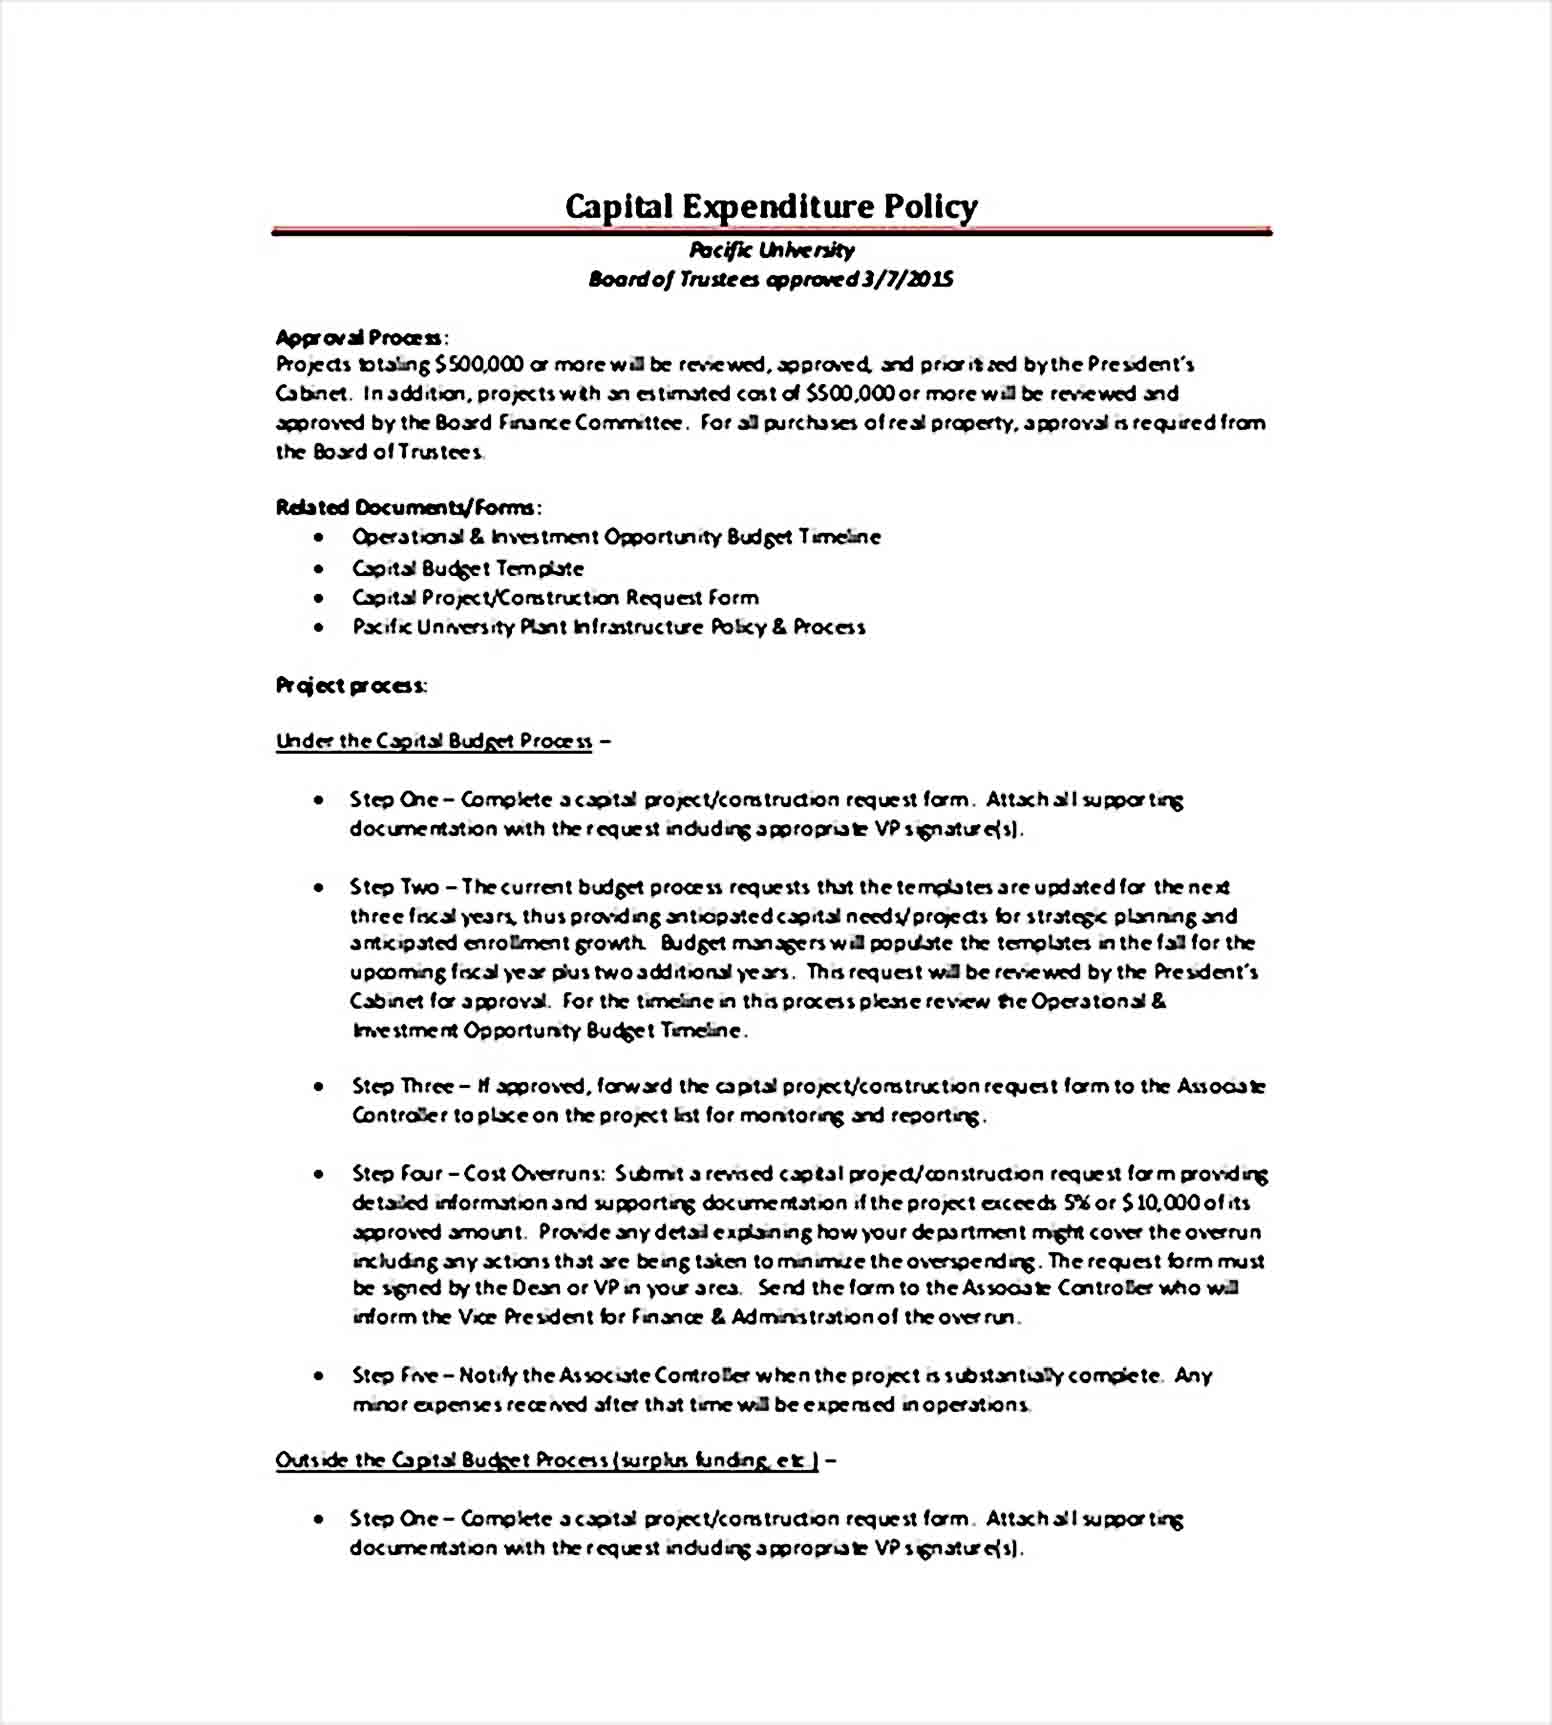 Capital Expenditure Budget Policy PDF 1